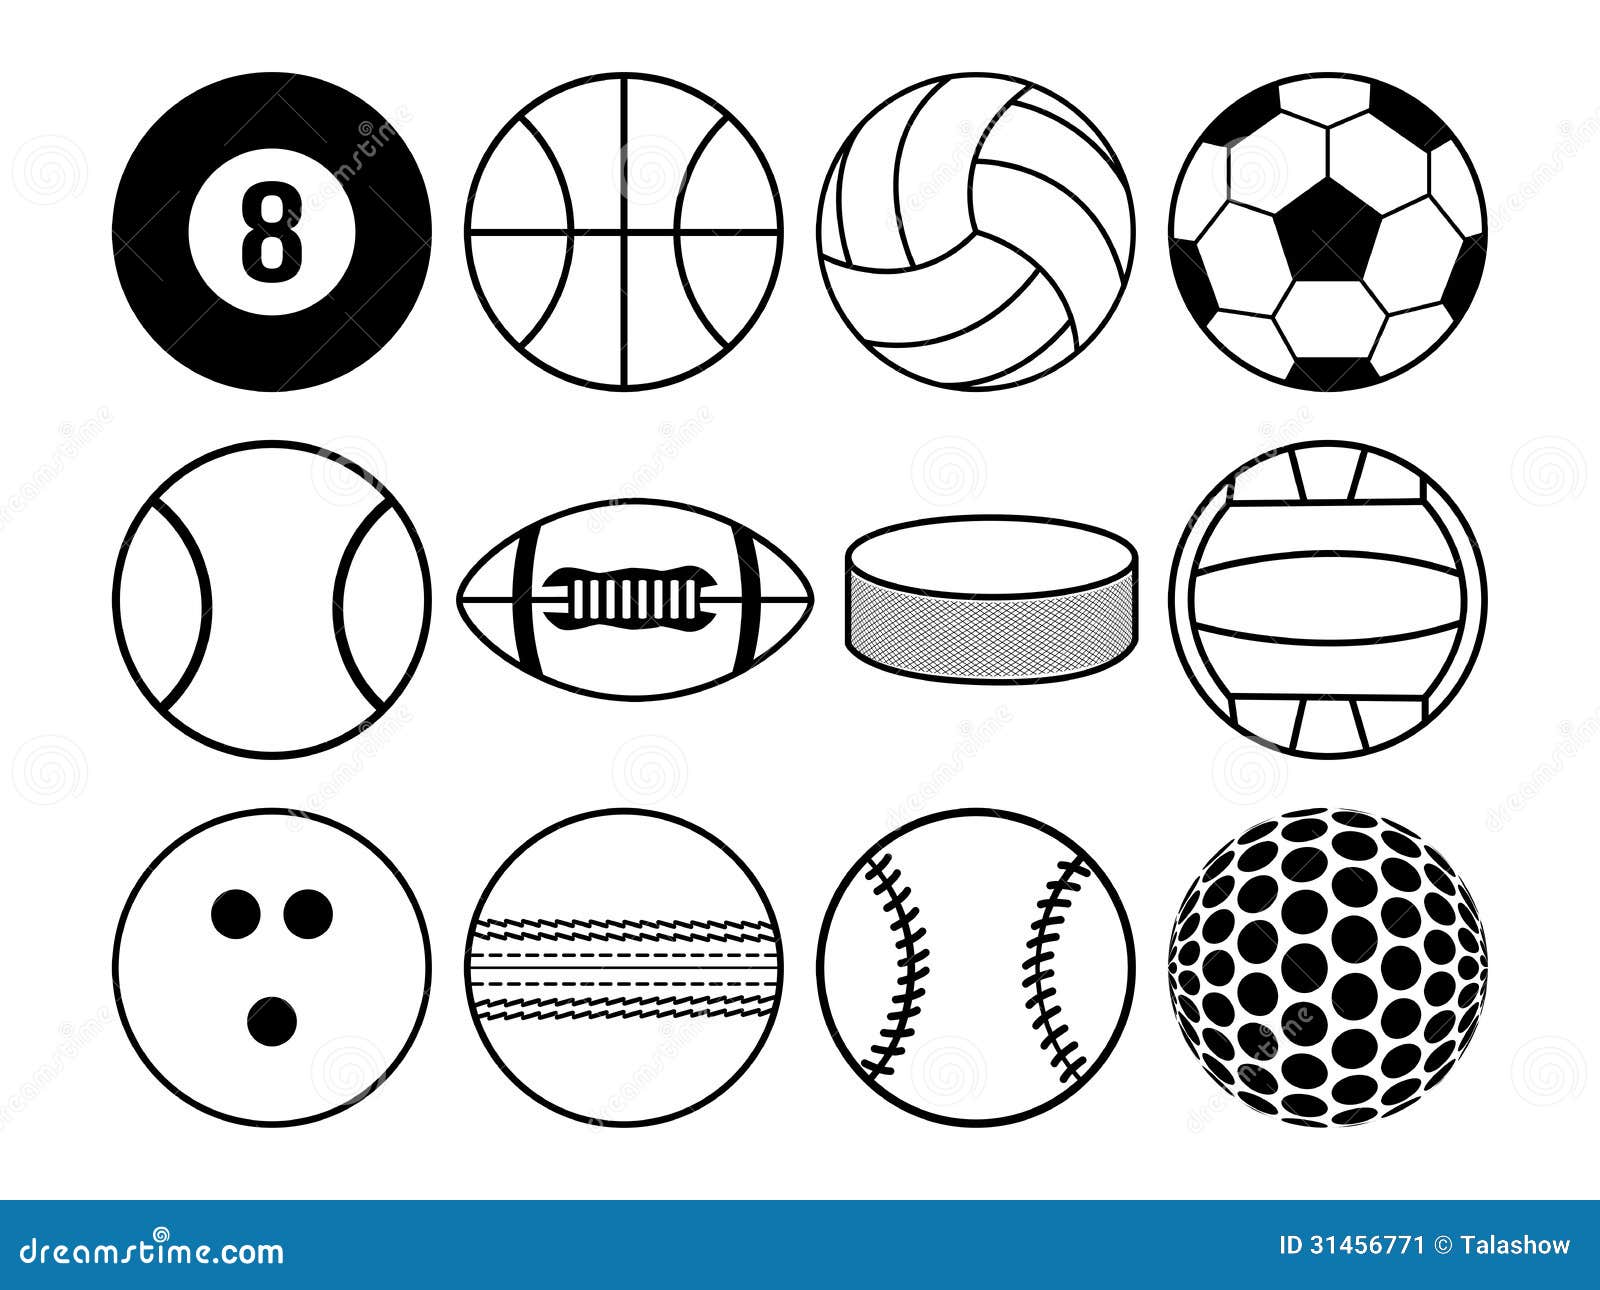 Sports balls black and white. This is file of EPS8 format.